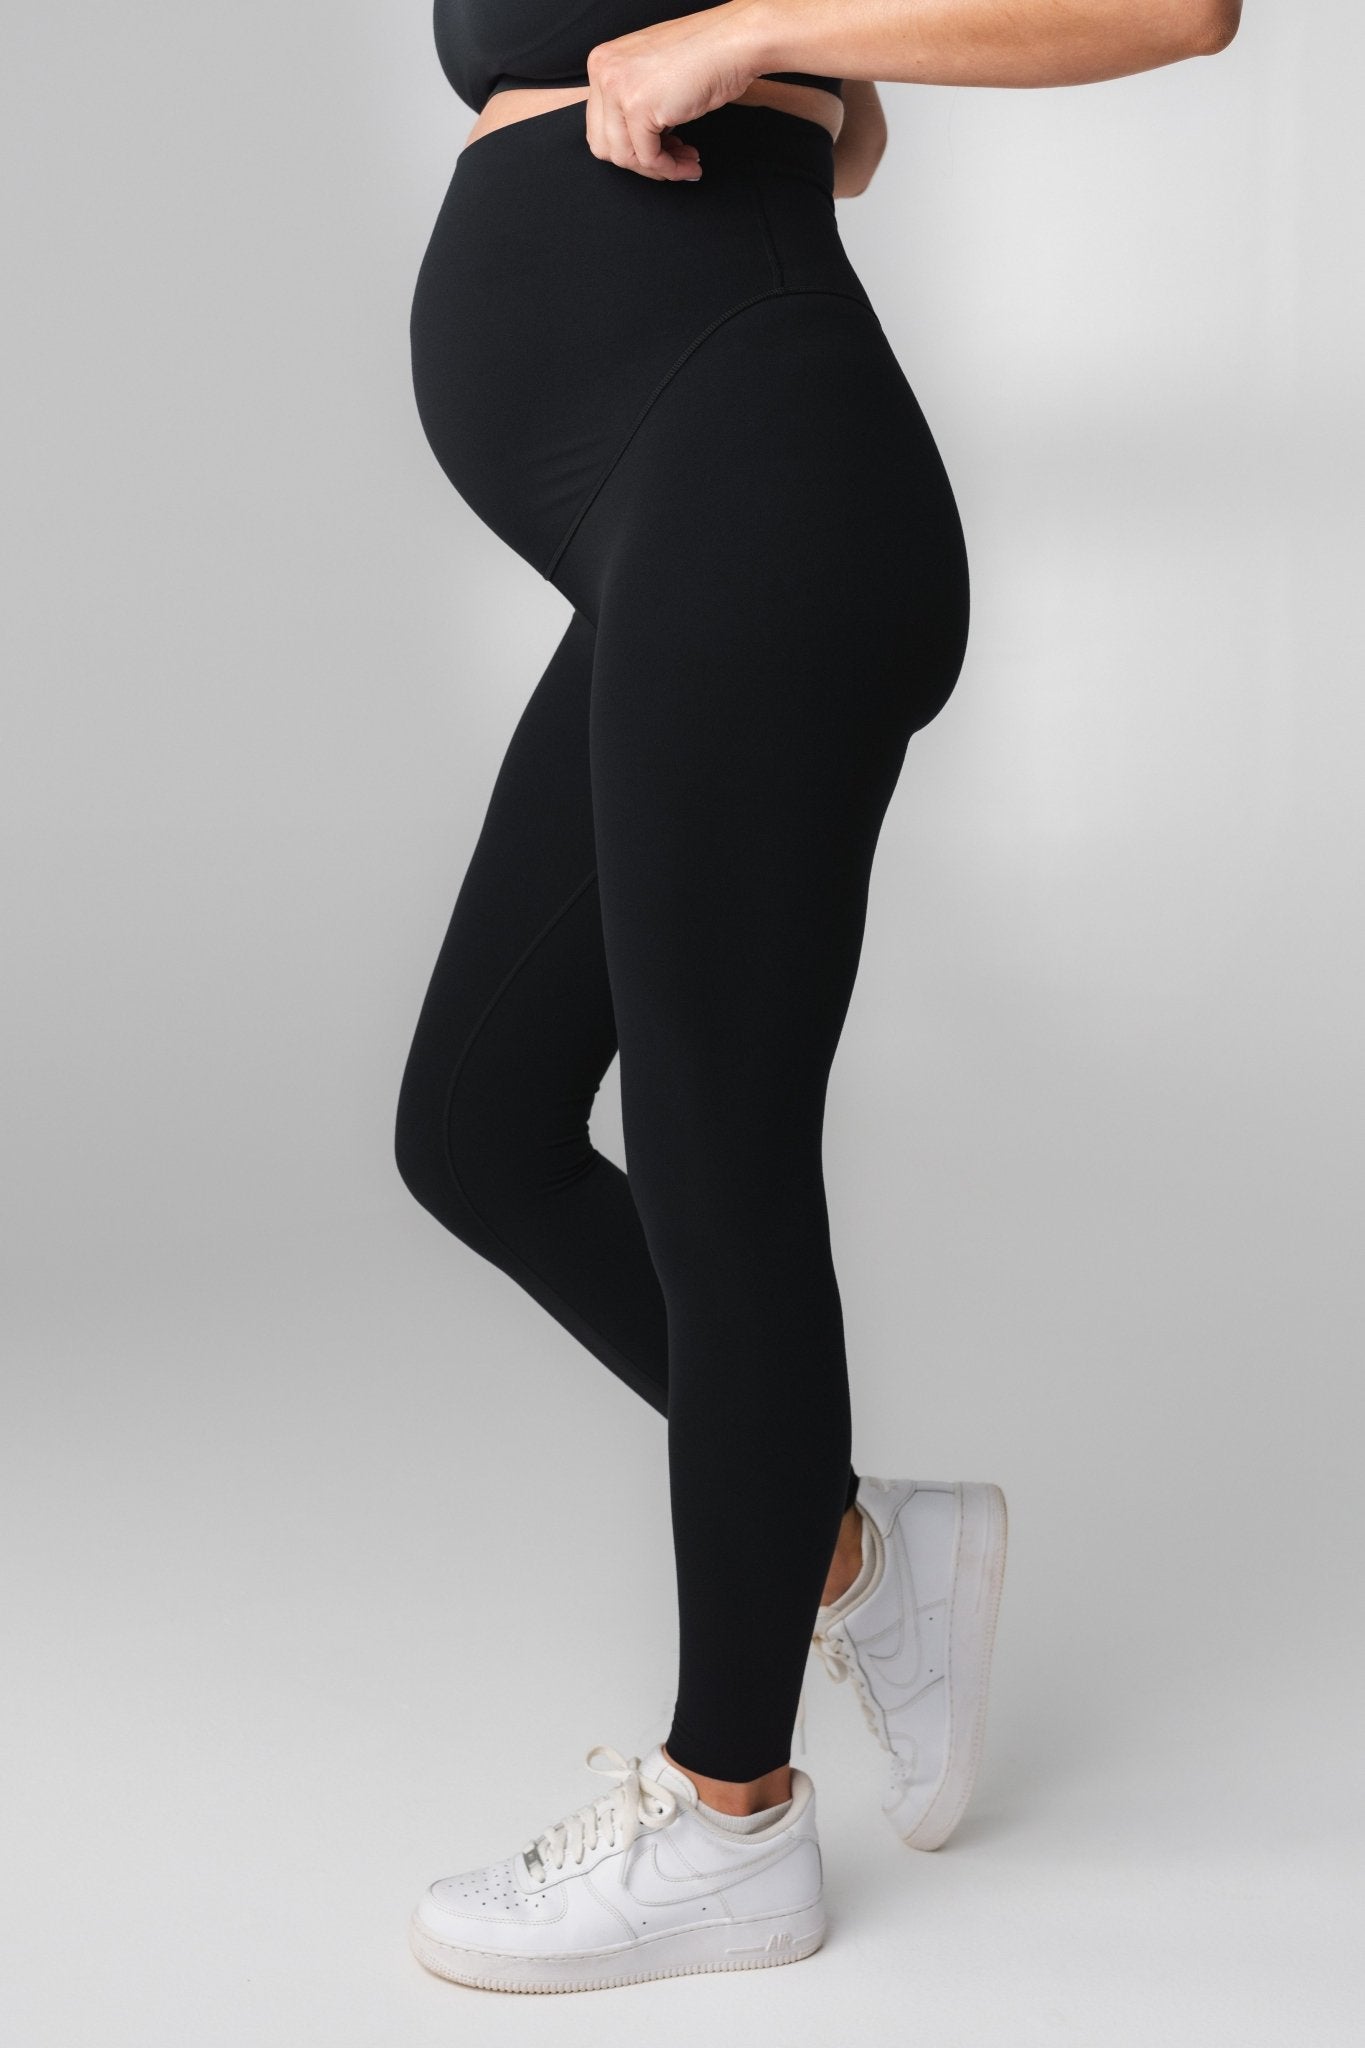 Women Cross Waist Workout Gym Pants Tights V Cut Butt Scrunch Sport Yoga  Leggings with Side Pocket No Front Seam - China Yoga and Gym price |  Made-in-China.com